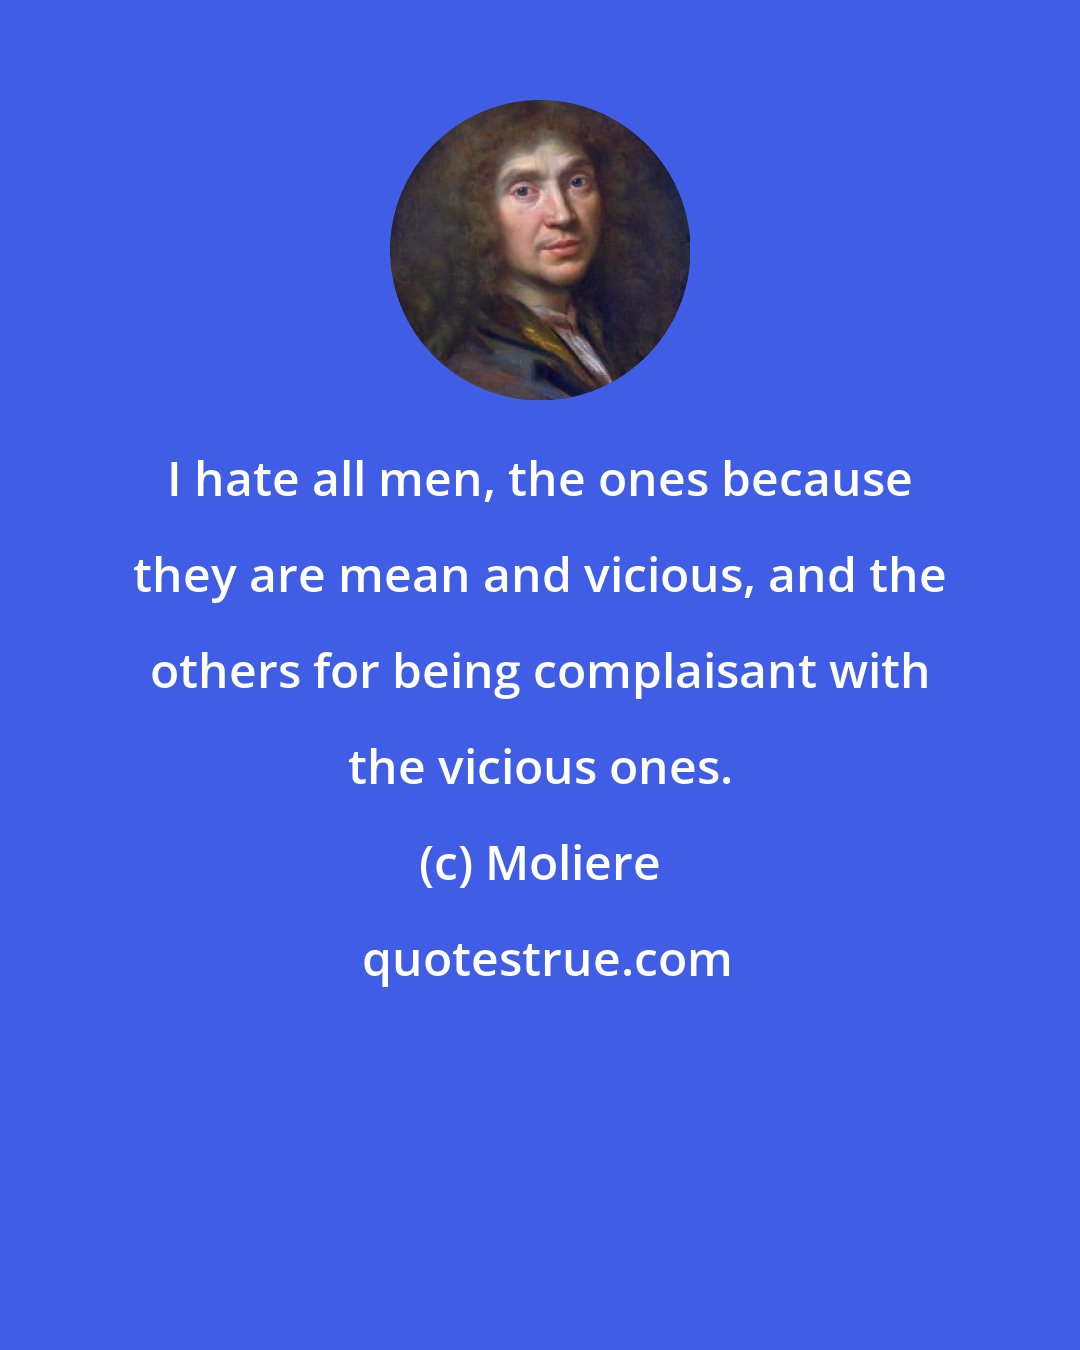 Moliere: I hate all men, the ones because they are mean and vicious, and the others for being complaisant with the vicious ones.